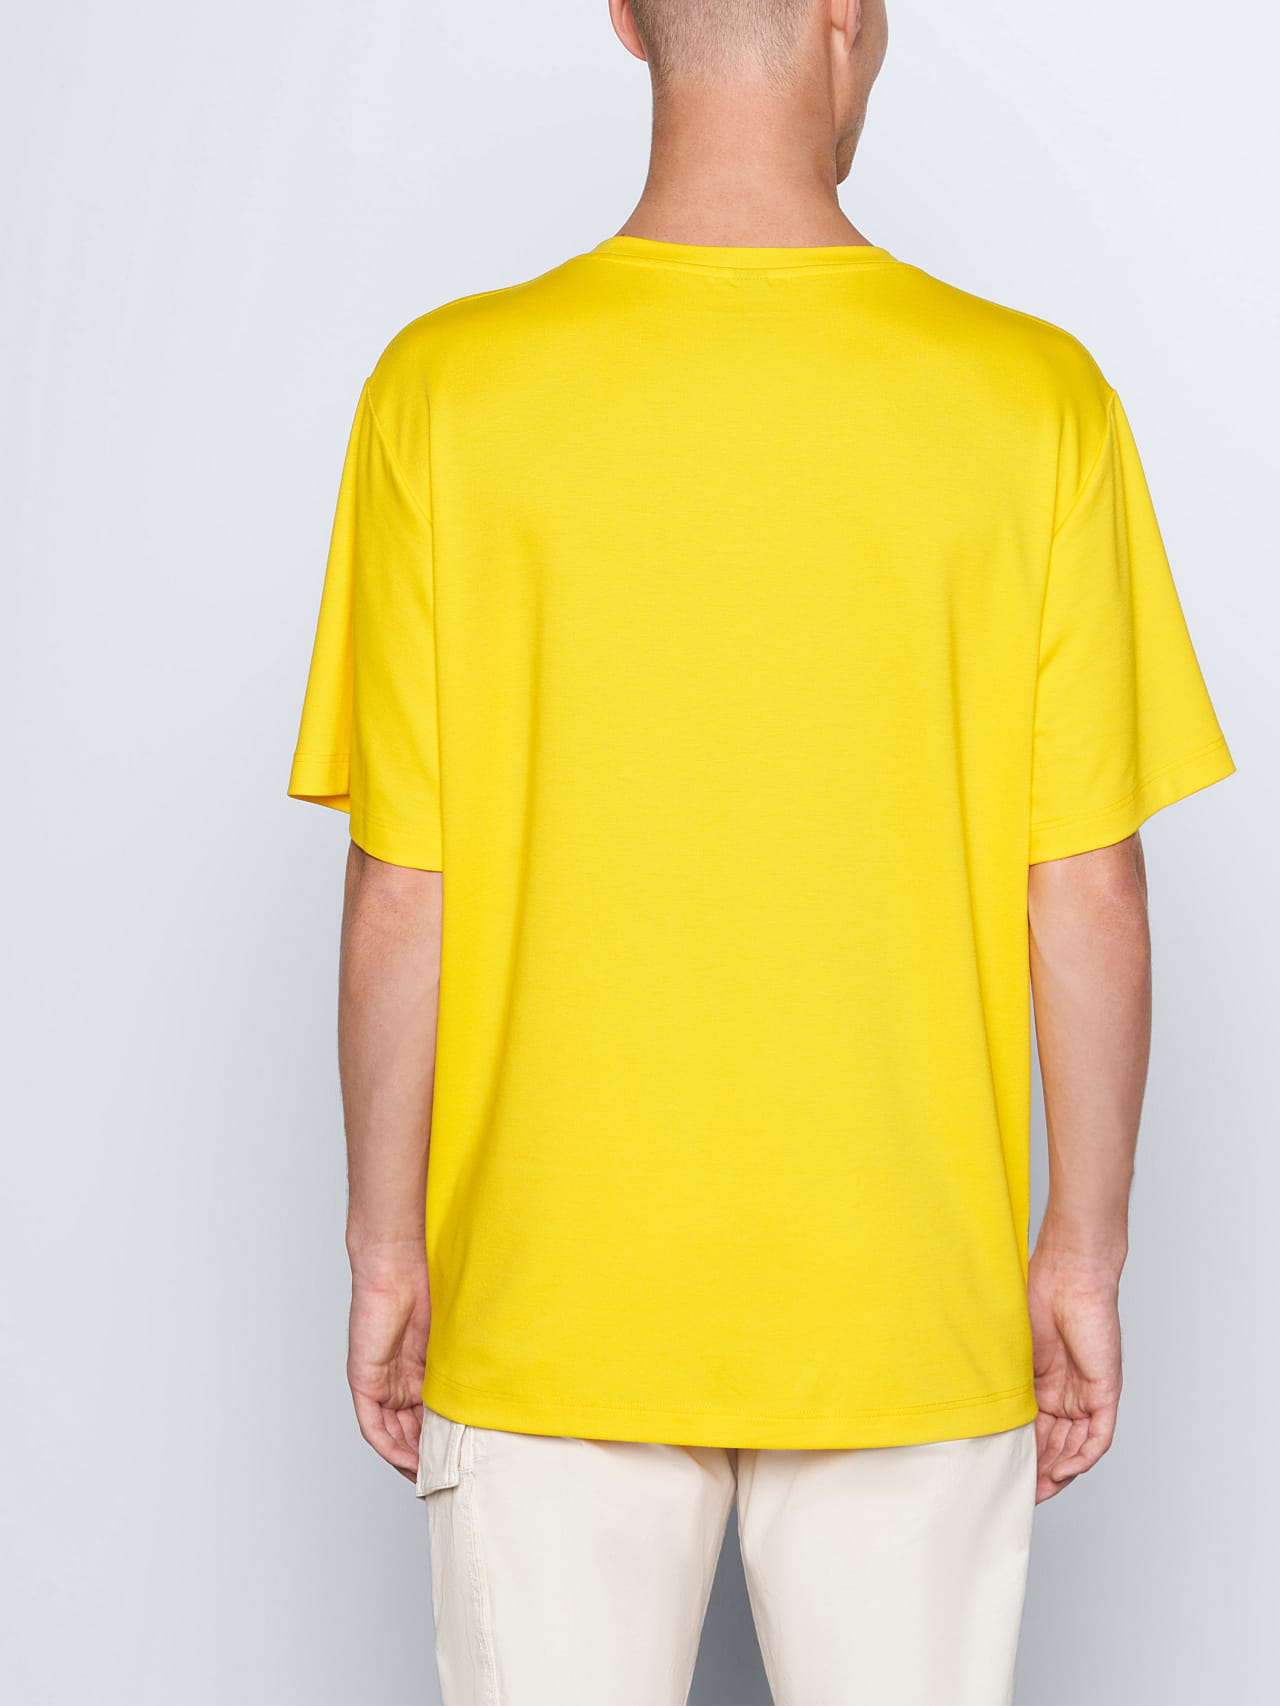 AlphaTauri | JAHEV V1.Y5.02 | Relaxed Logo T-Shirt in yellow for Men